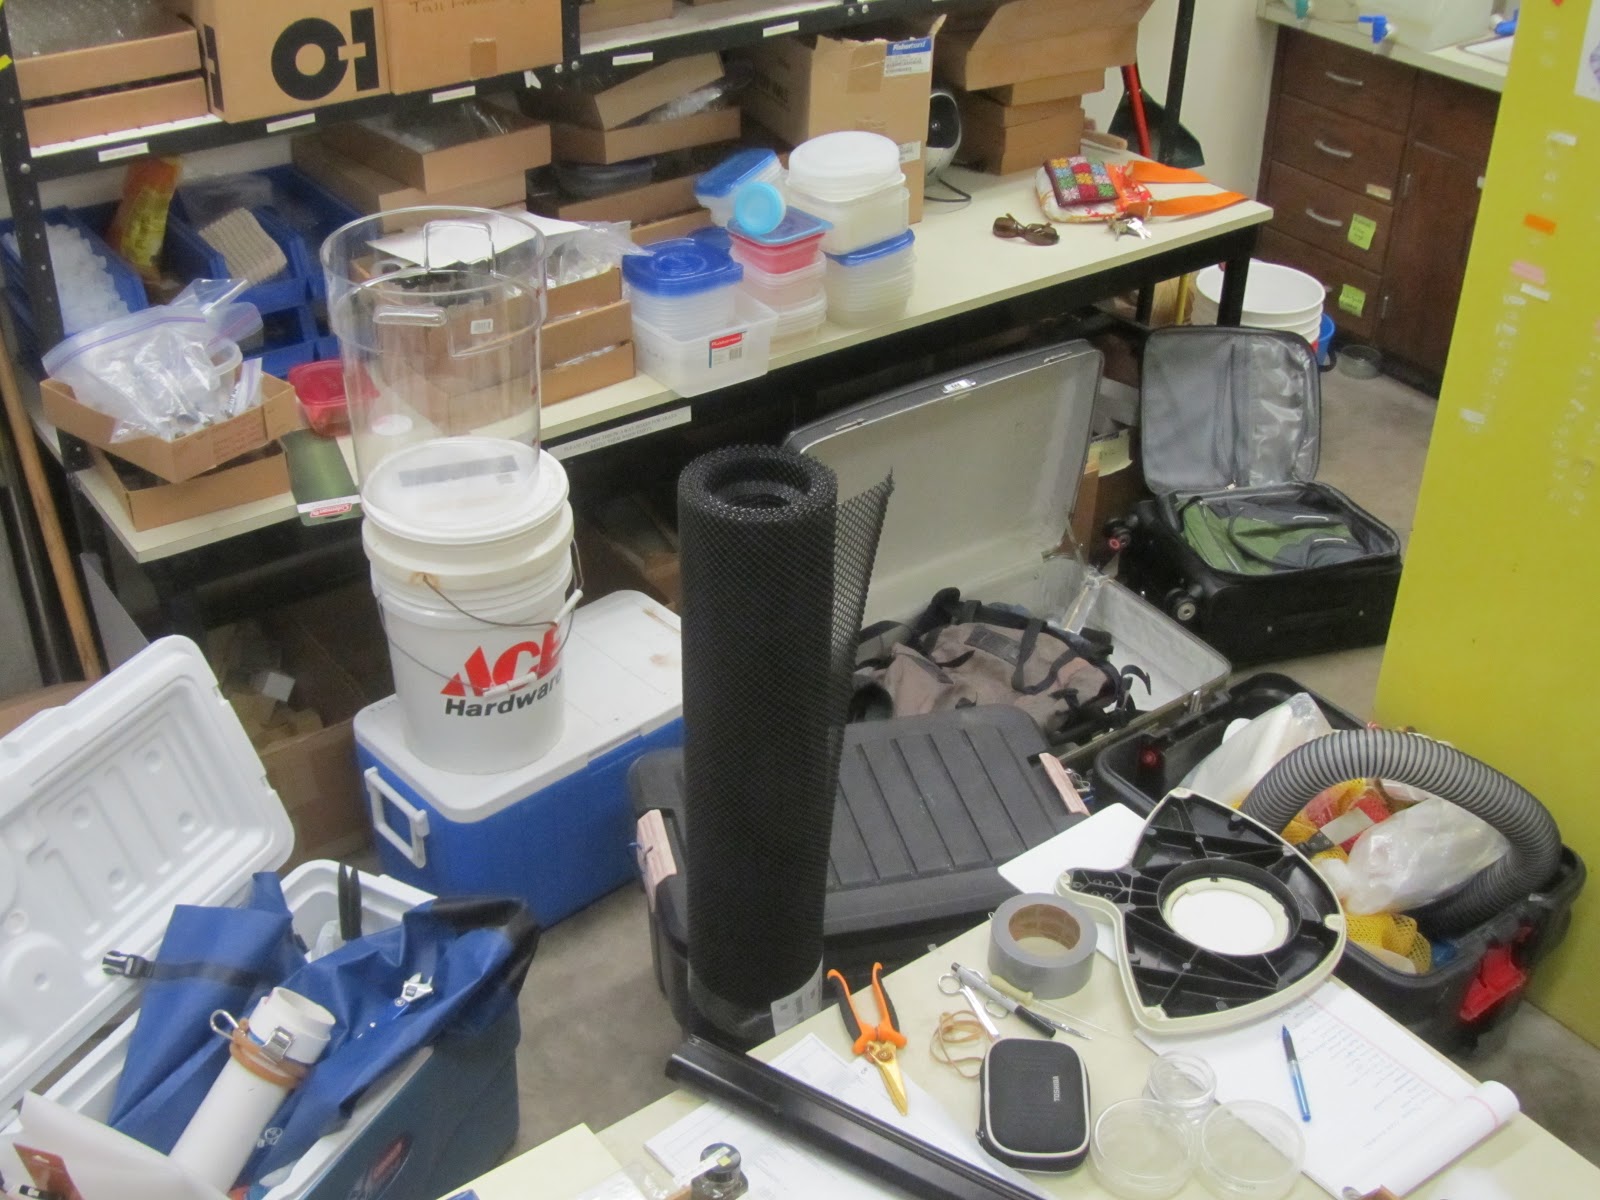 buckets, coolers, tupperware and other gear filling the tables and floor in the lab